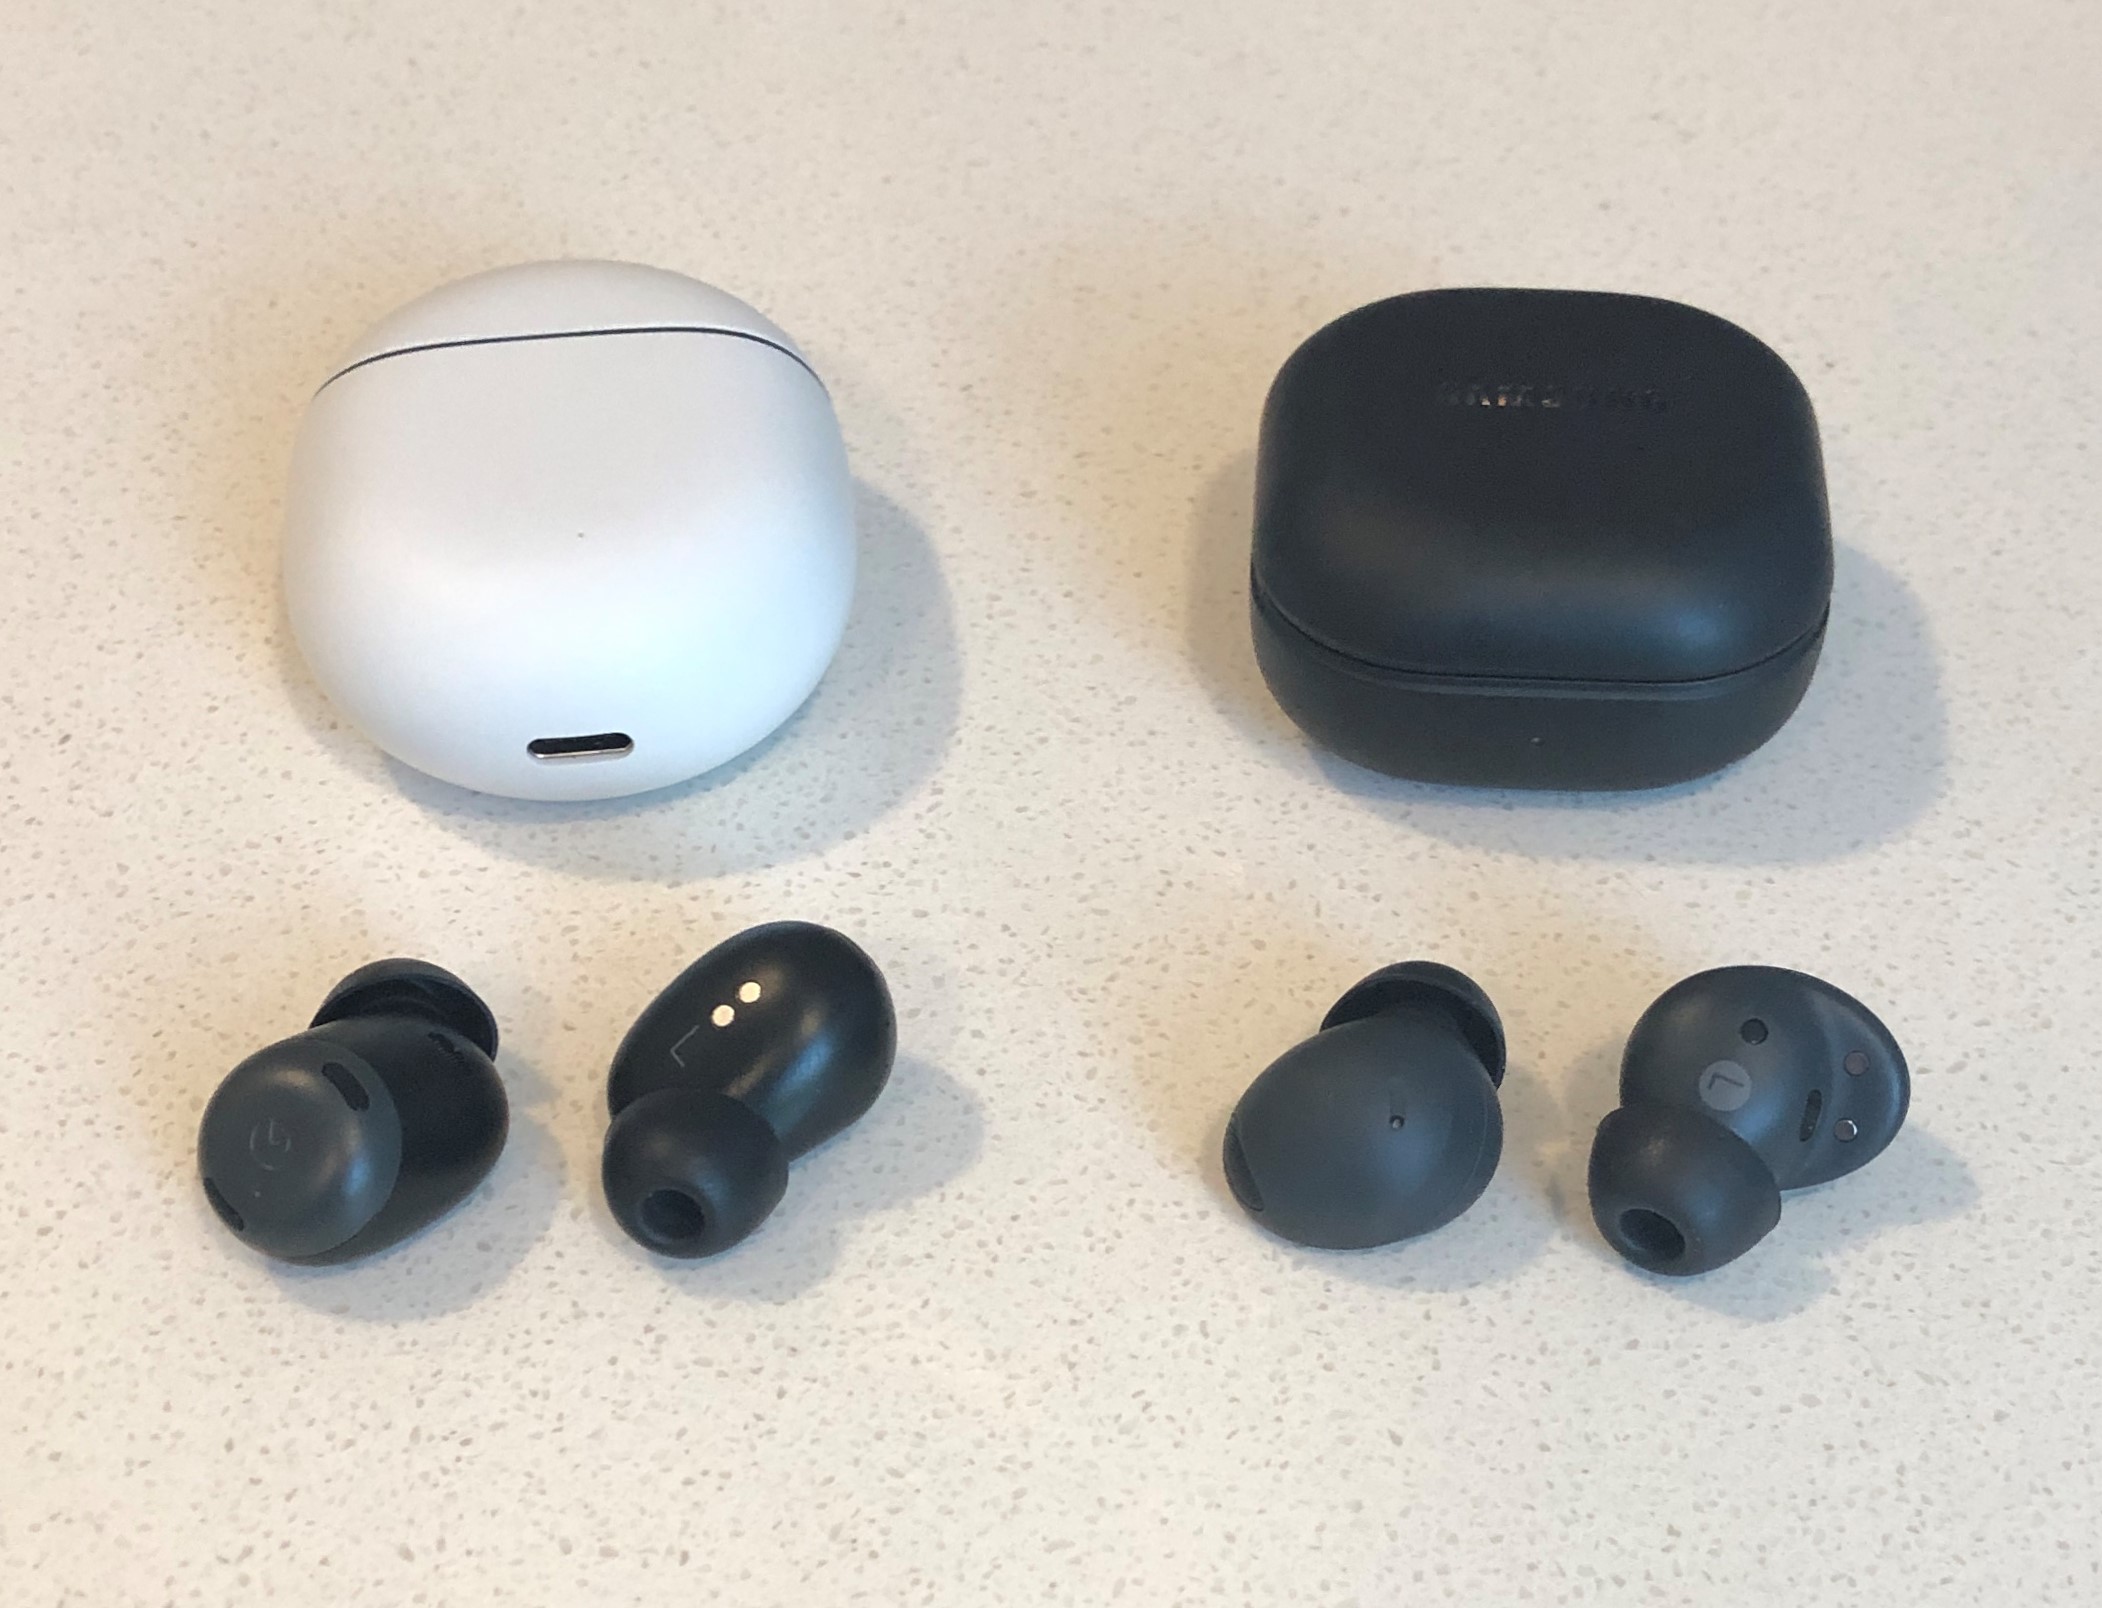 Google Pixel Buds Pro vs Samsung Galaxy Buds2 Pro charging case and wireless earbuds